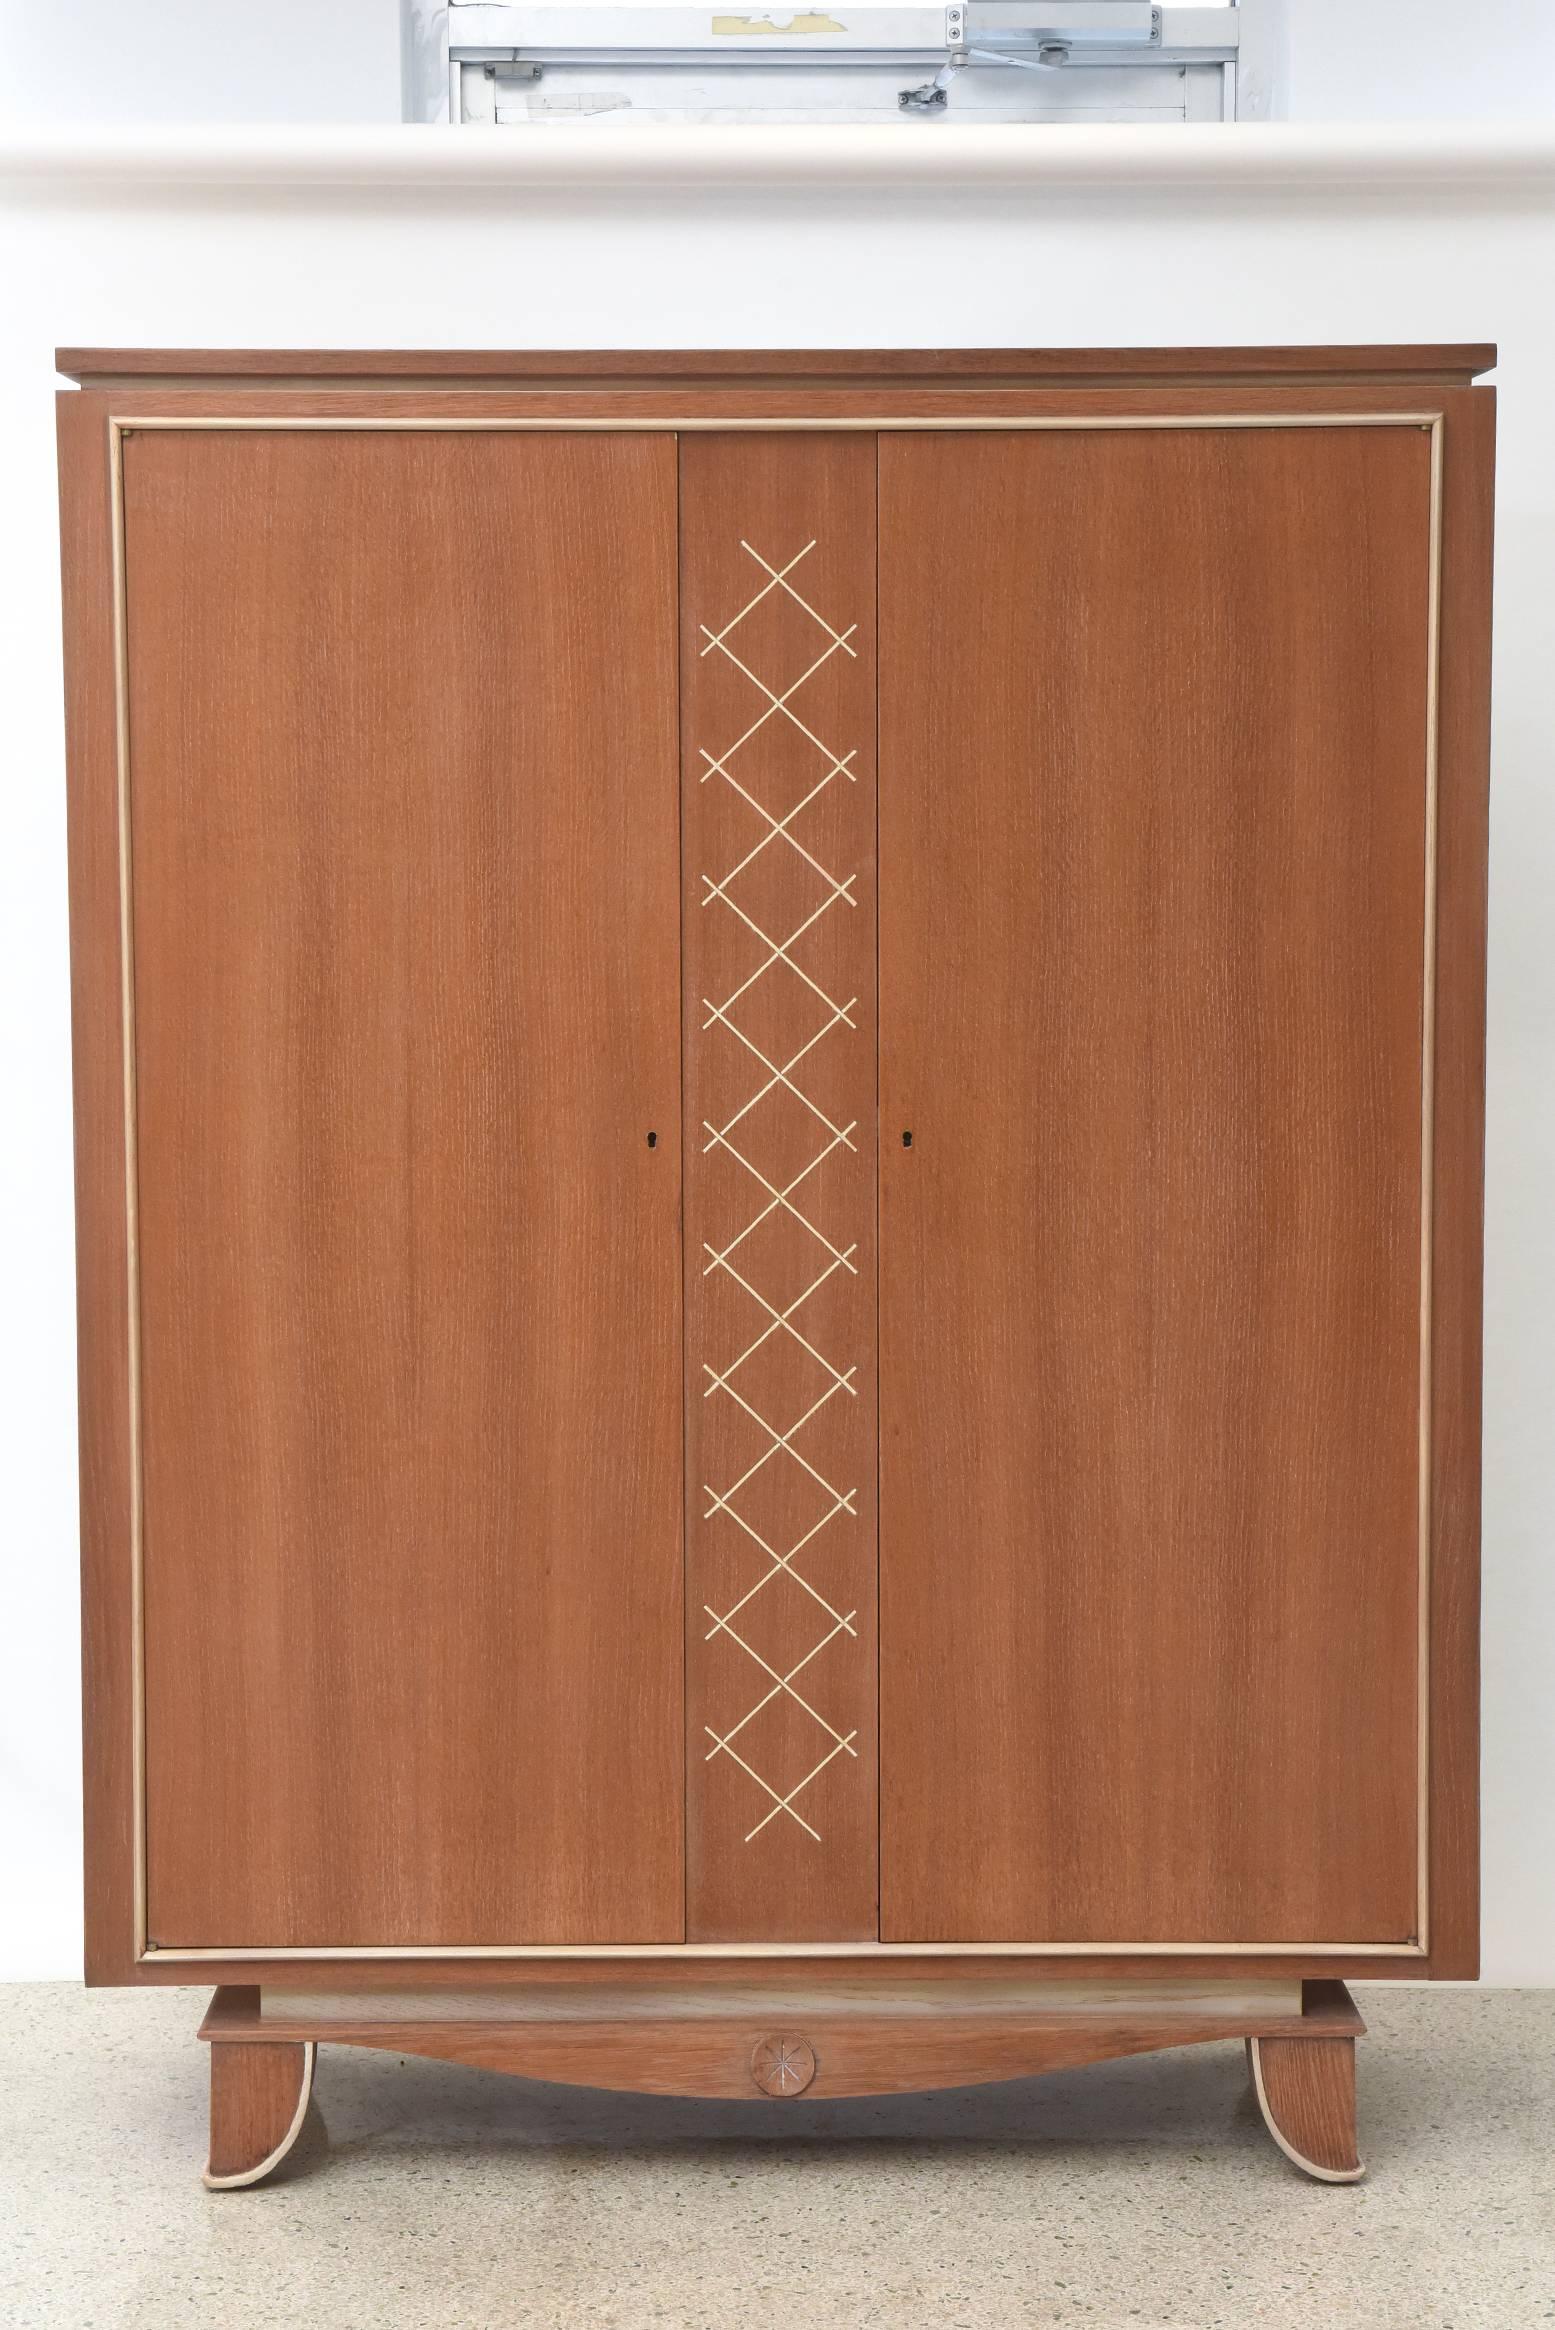 This French modern limed oak and parchment tall cabinet by designer Pierre Petit was made in the 1940s. The cabinet stands on raised carved legs with interlacing frieze in the centre. It has 2 doors with inlaid parchment in a cross hatched pattern